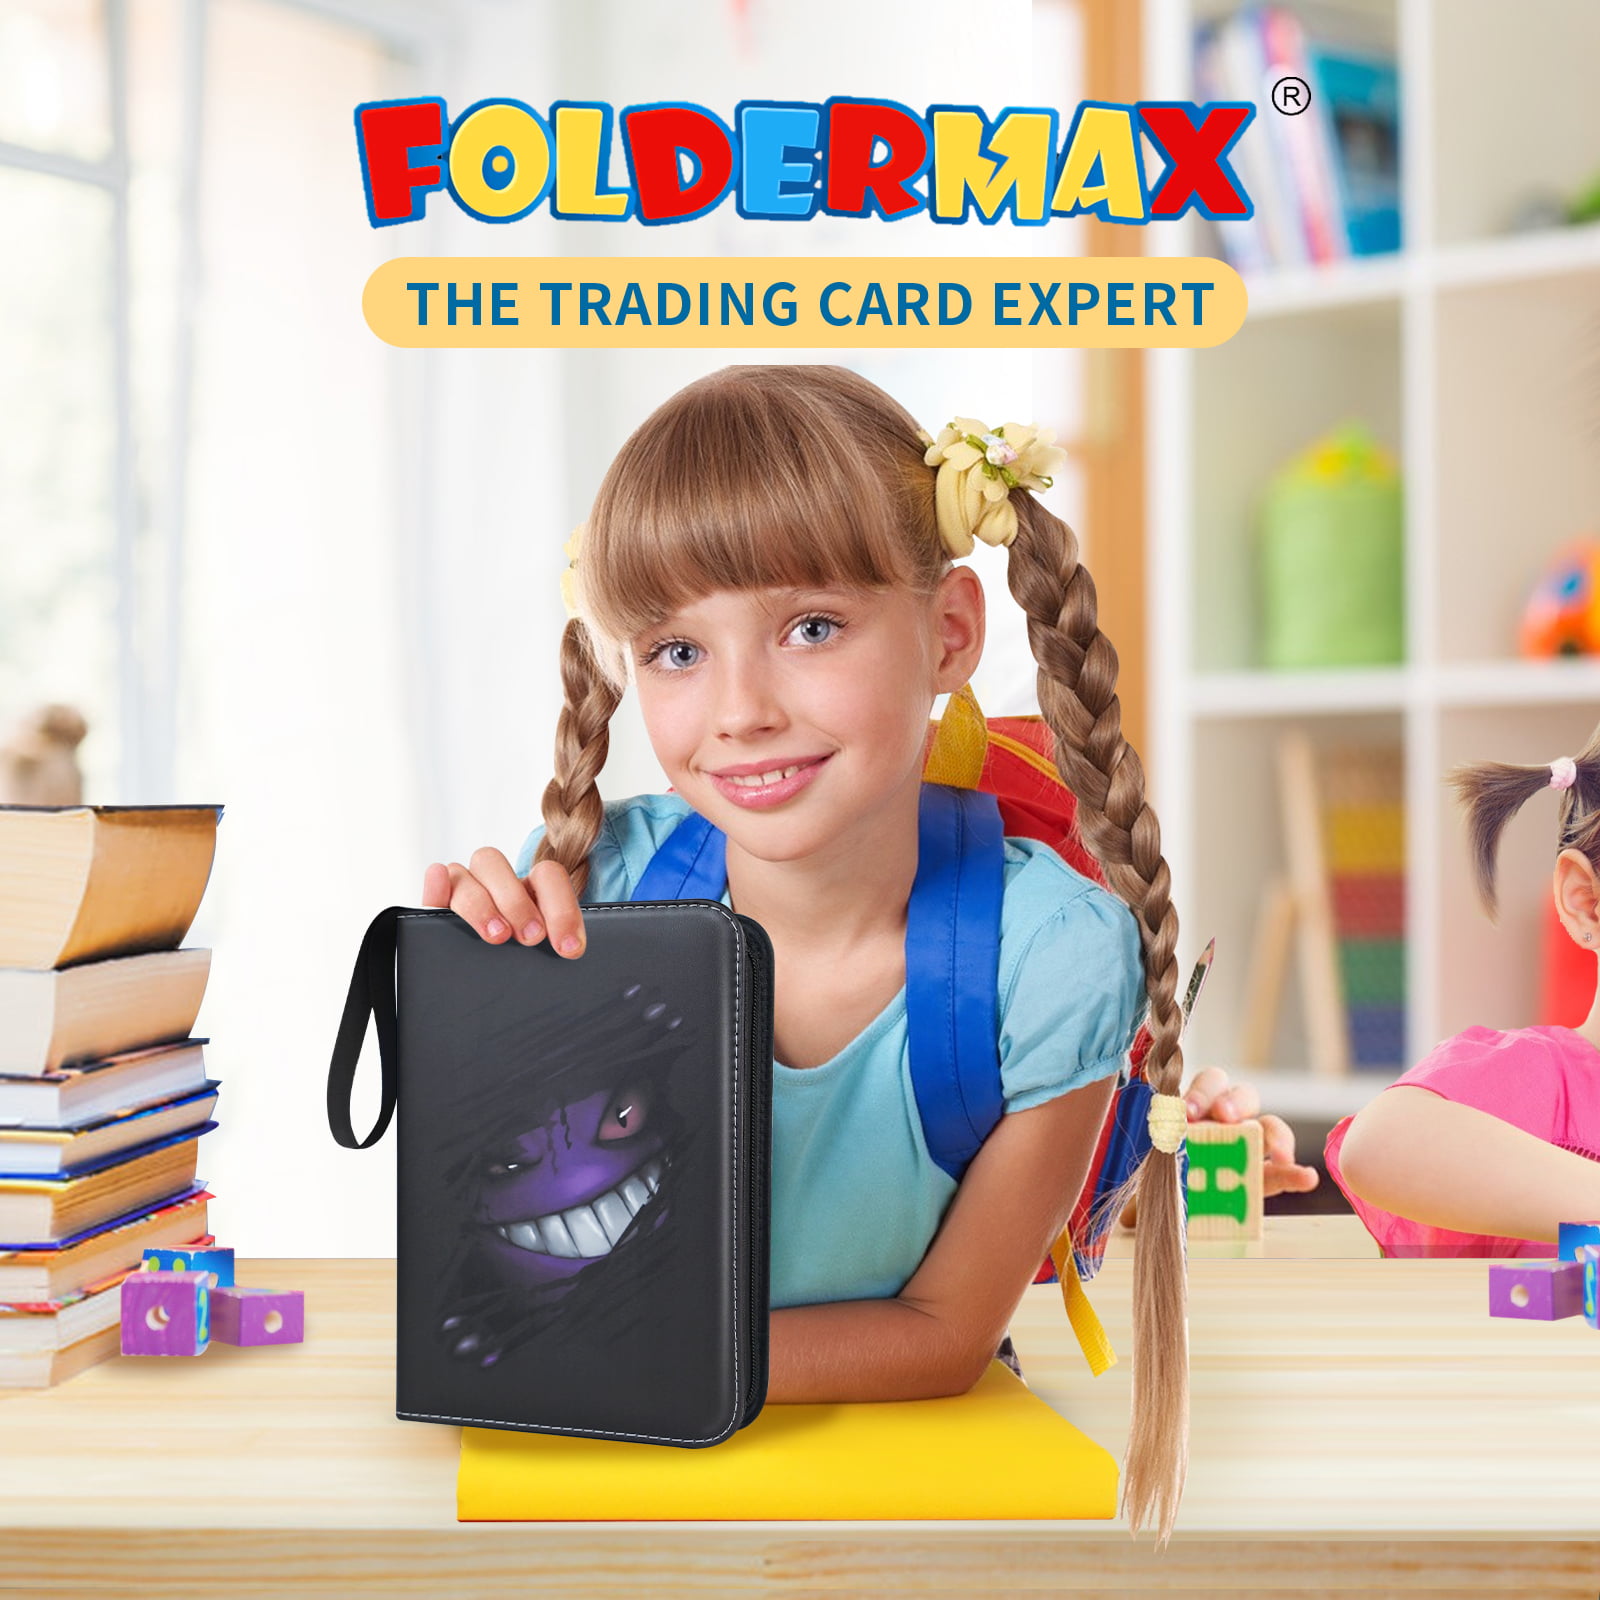 Foldermax Card Binder for Pokemon Cards Binder 4-Pocket 400 Cards Trading Card Games Collection Binder with 50 Removable Sleeves 